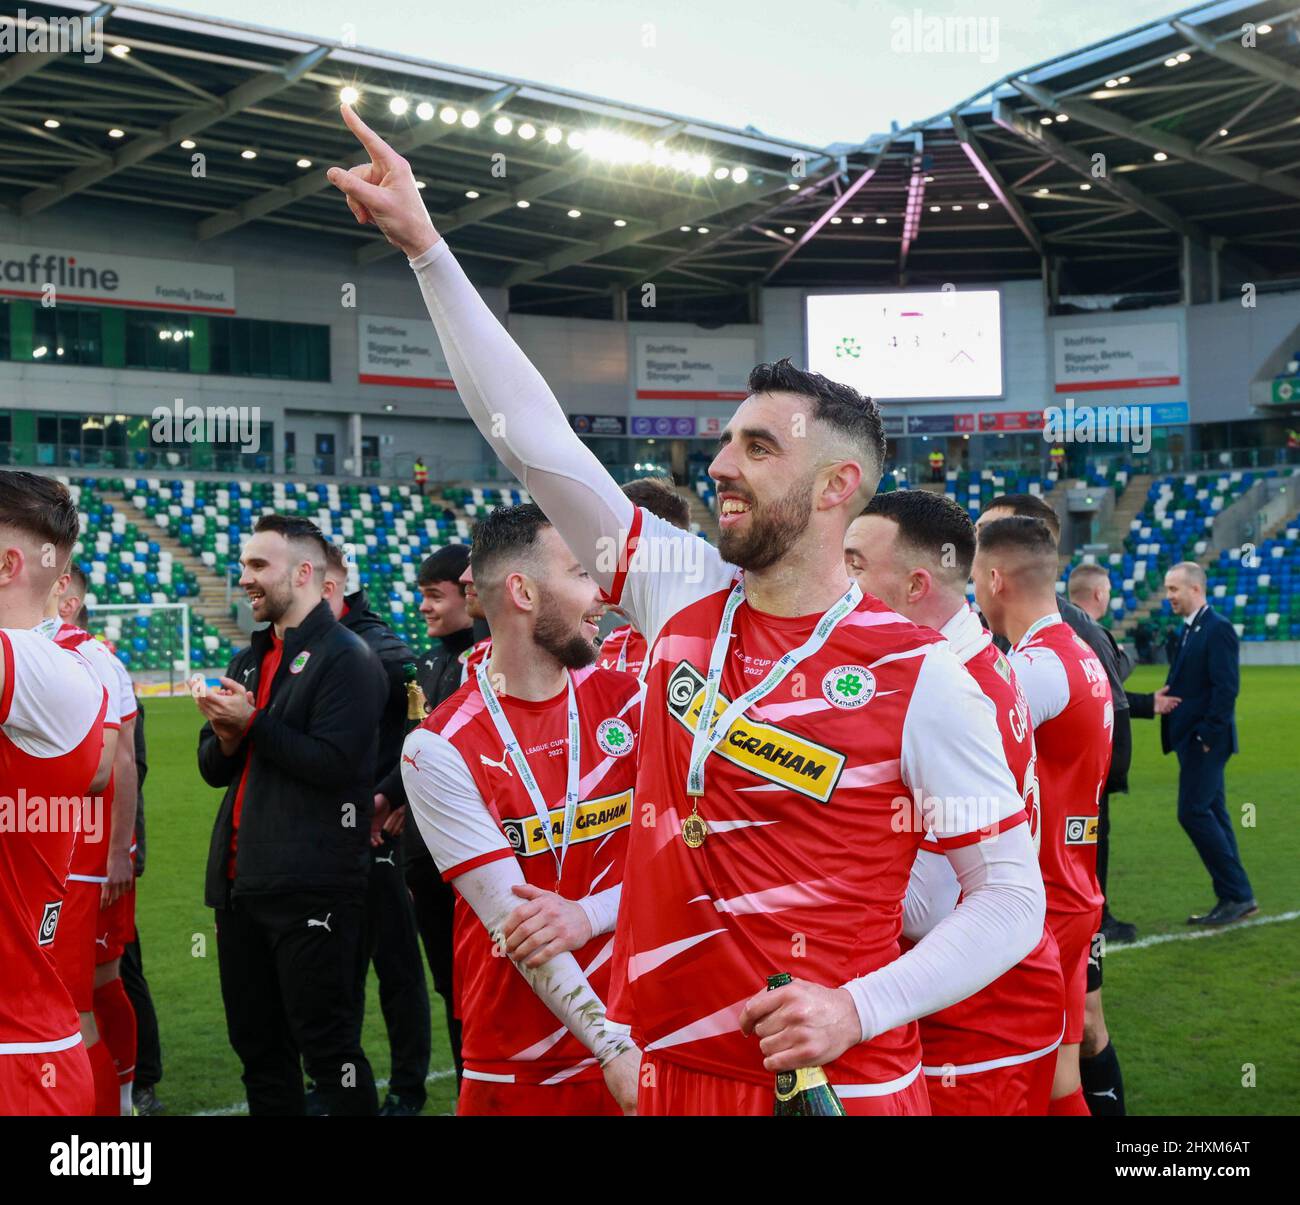 Windsor Park, Belfast, Northern Ireland, UK. 13 Mar 2022. BetMcLean League Cup Final – Cliftonville v Coleraine. Today's game between Cliftonville (red) and Coleraine is the first ever major domestic cup football final to be played on a Sunday in Northern Ireland. Action from today's final. Joe Gormley celebrates. Credit: CAZIMB/Alamy Live News. Stock Photo